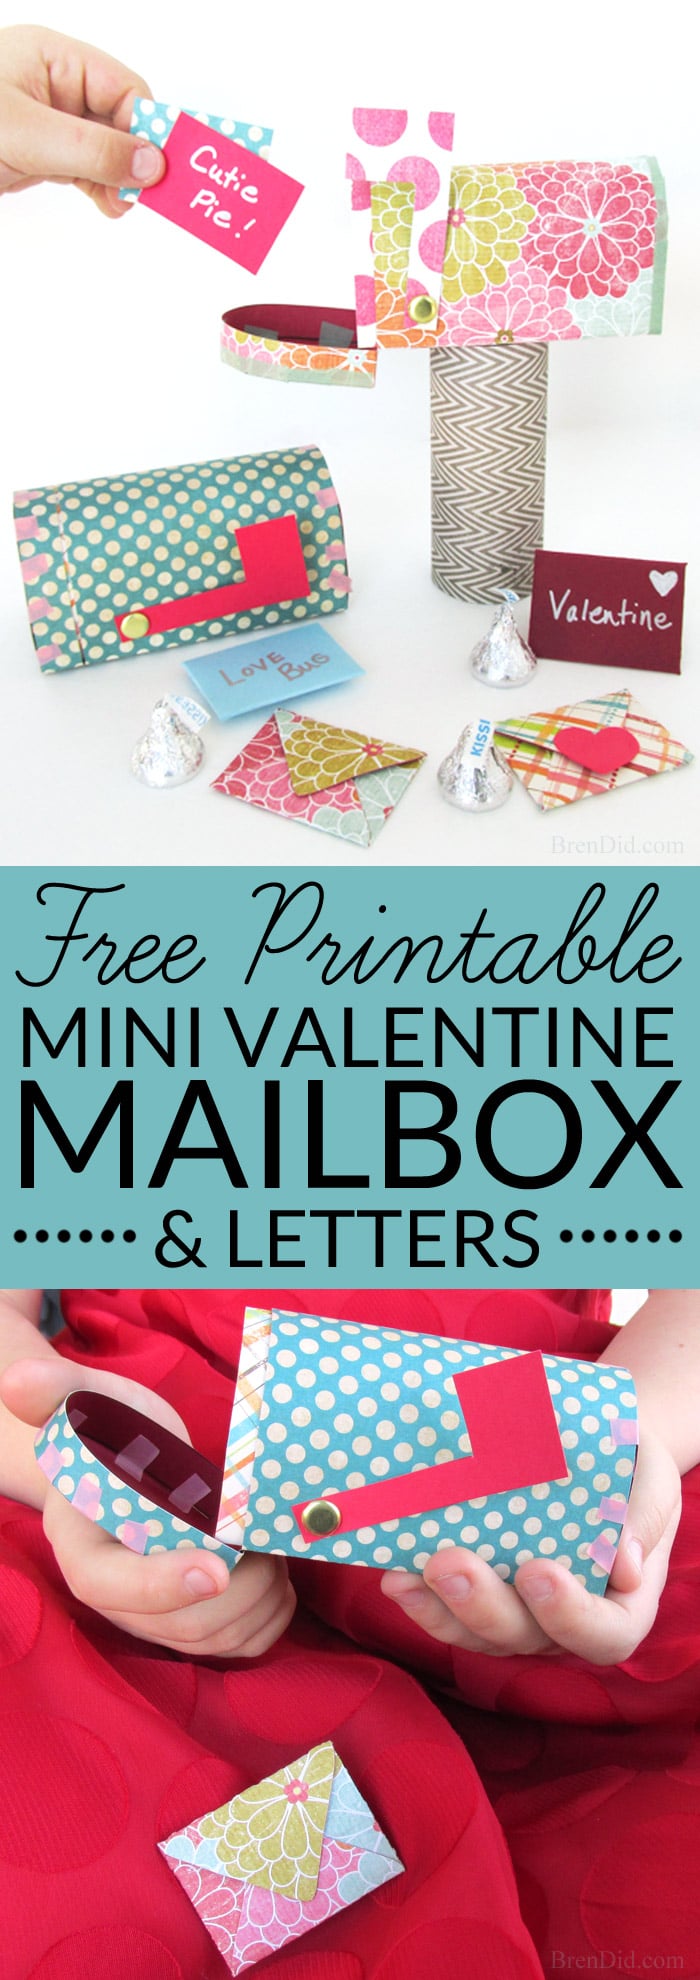 Send tiny love notes with this free Valentine Paper Craft set featuring a free printable Valentine mailbox and mini Valentine’s Day cards. It’s an easy Valentine craft that can be used to hold sweets or just sweet sentiments! Get the pattern and instructions at BrenDid.com.